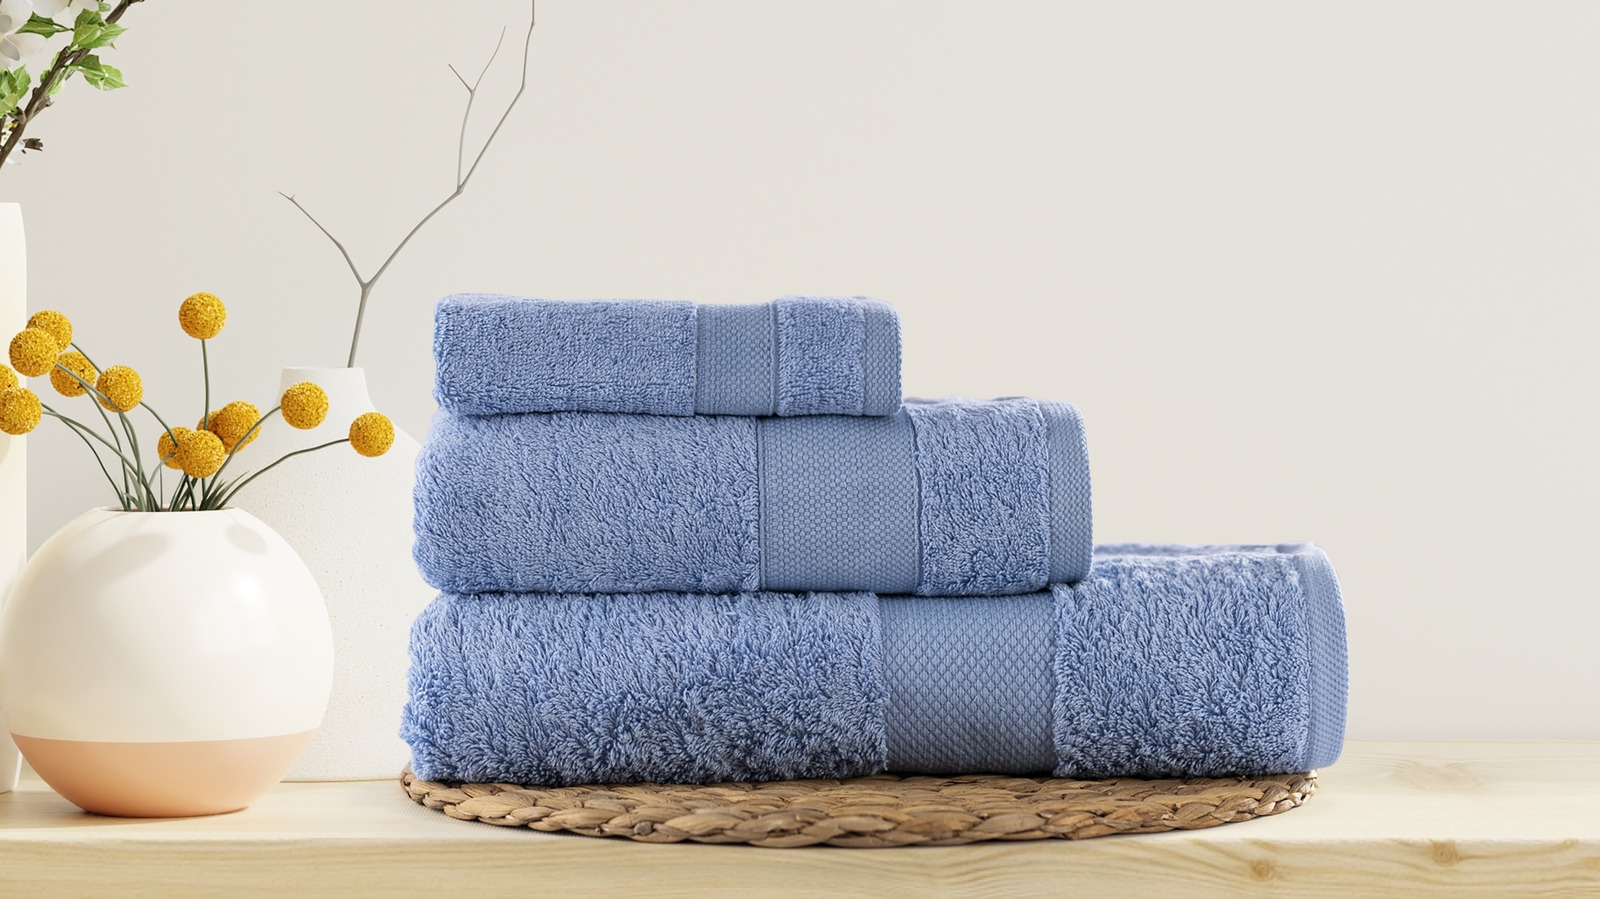 https://www.housedigest.com/img/gallery/this-tiktok-cleaning-hack-will-keep-your-towels-fluffy-and-fresh/l-intro-1673116518.jpg